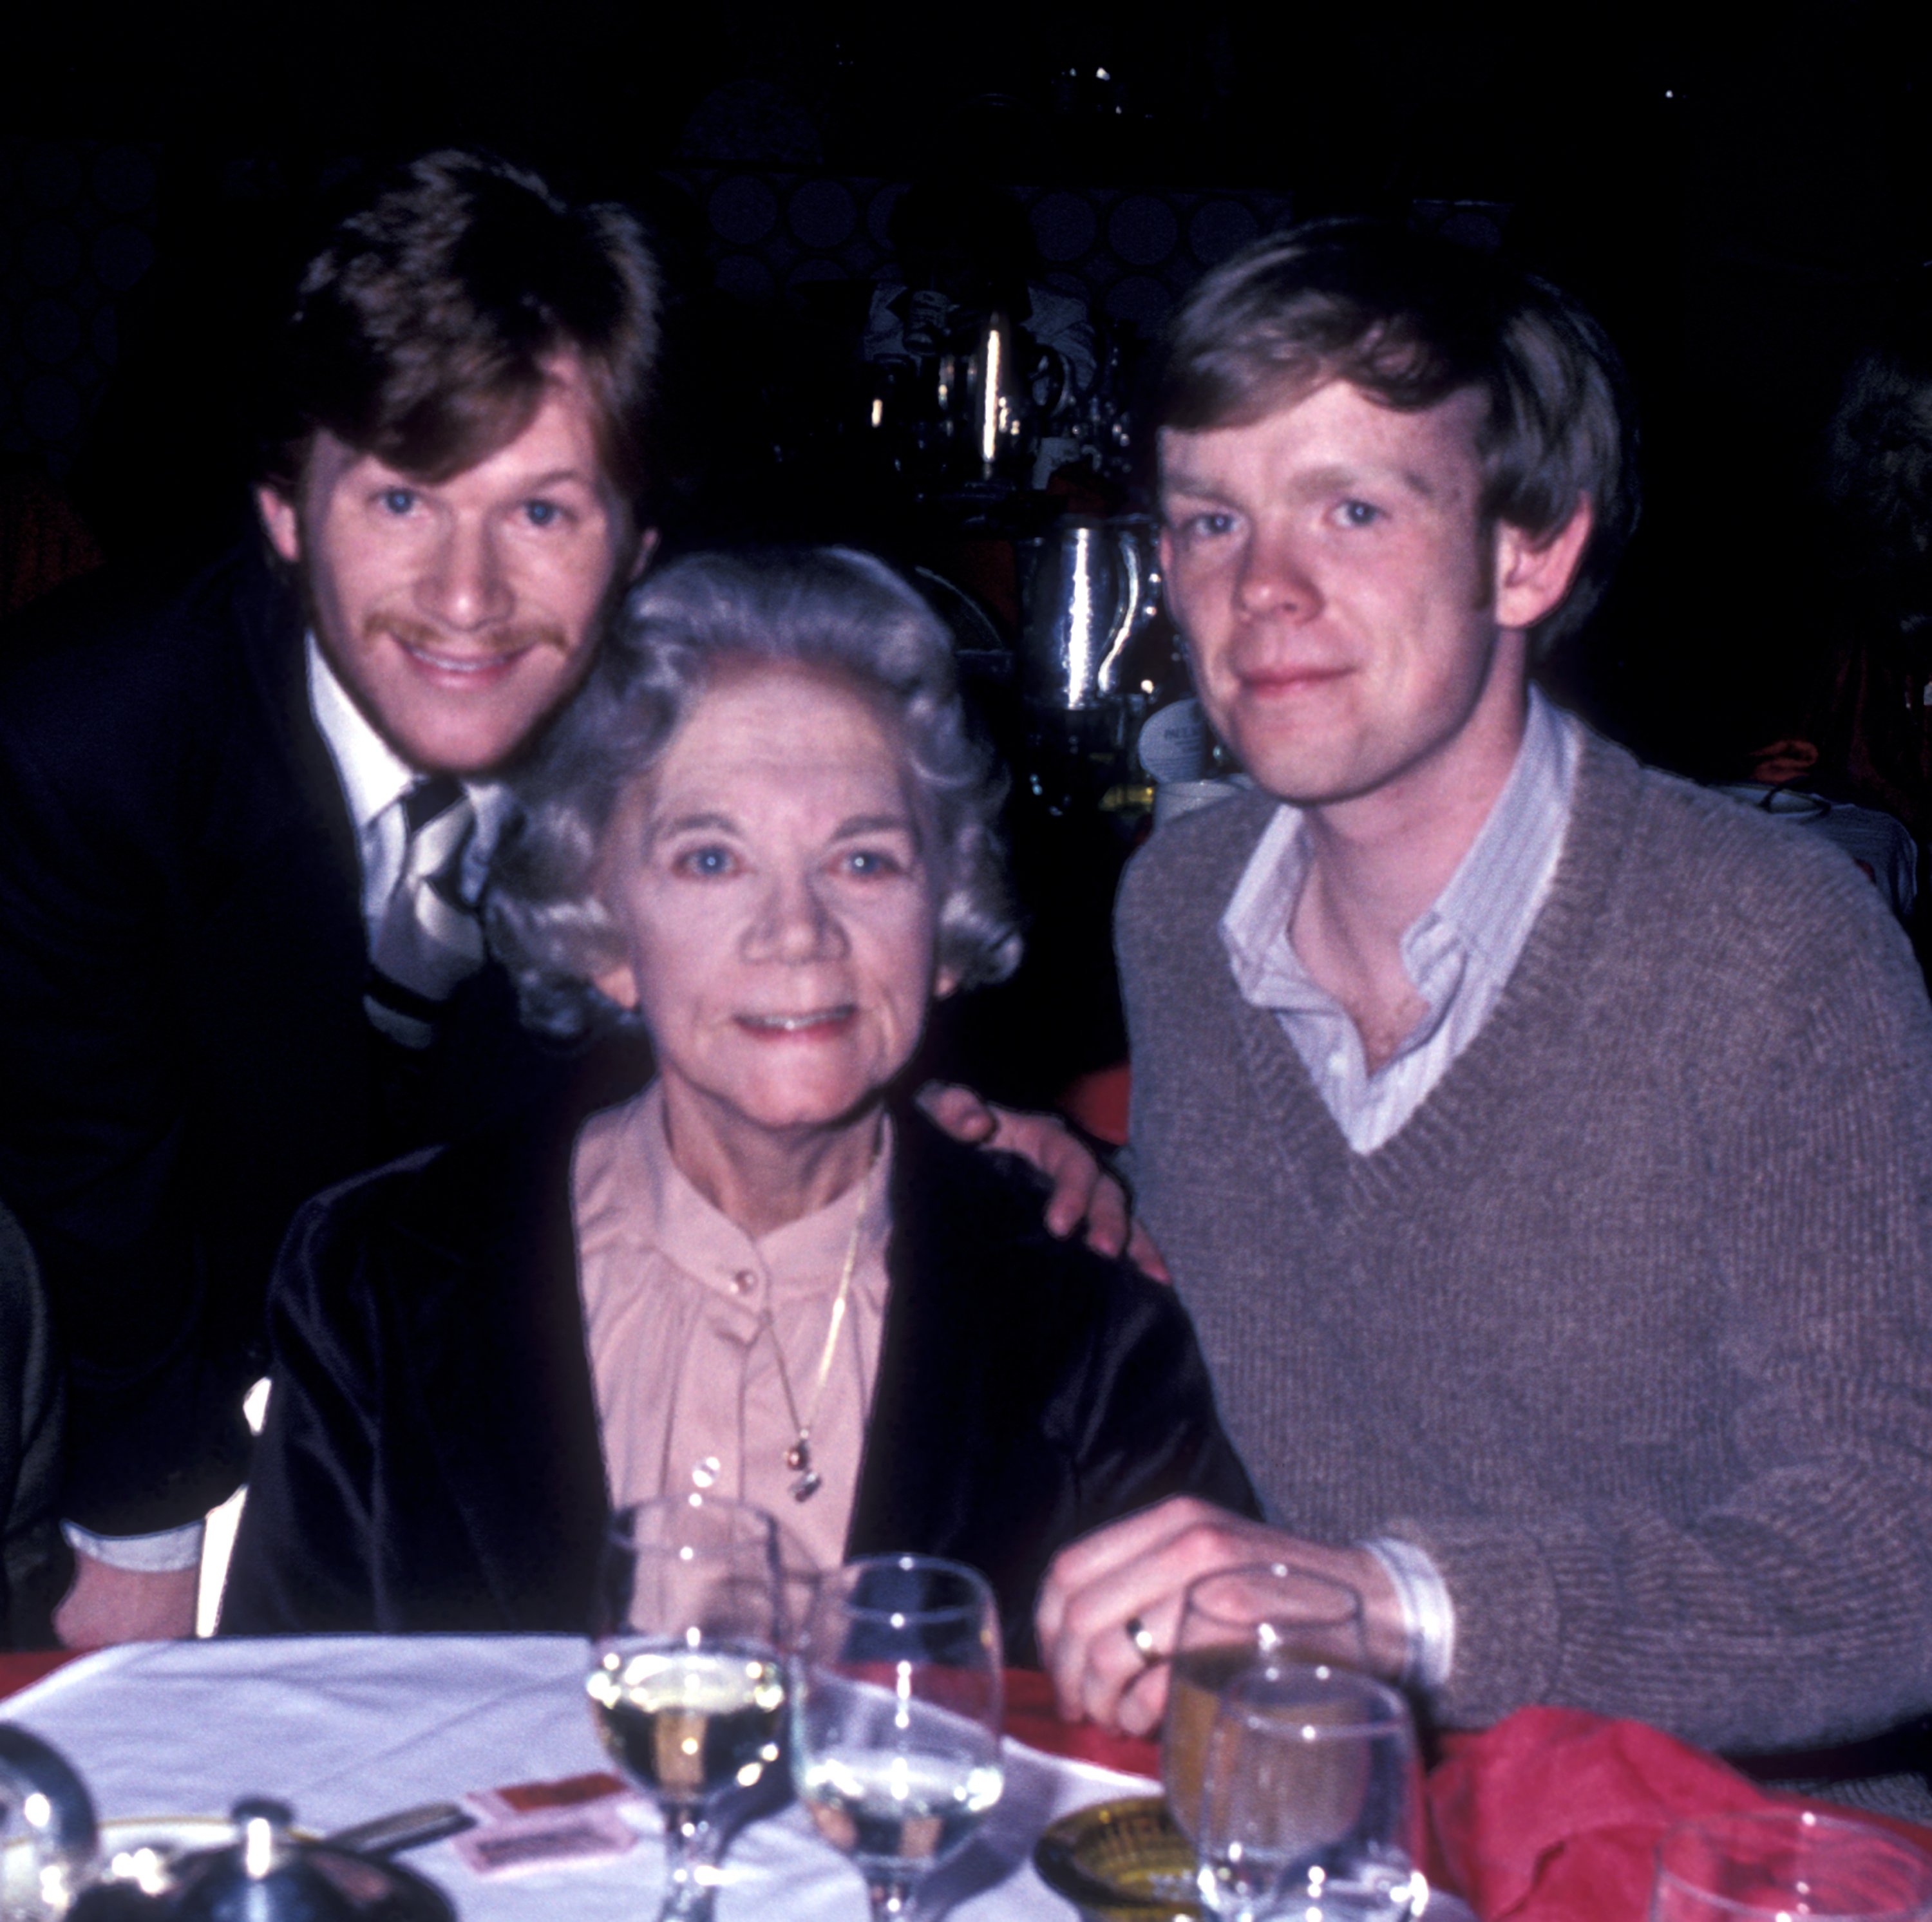 Actors Jon Walmsley, Ellen Corby and Eric Scott attending "The Waltons" Wrap Party at the Century Plaza Hotel on March 23, 1980 in Century City, California. | Source: Getty Images